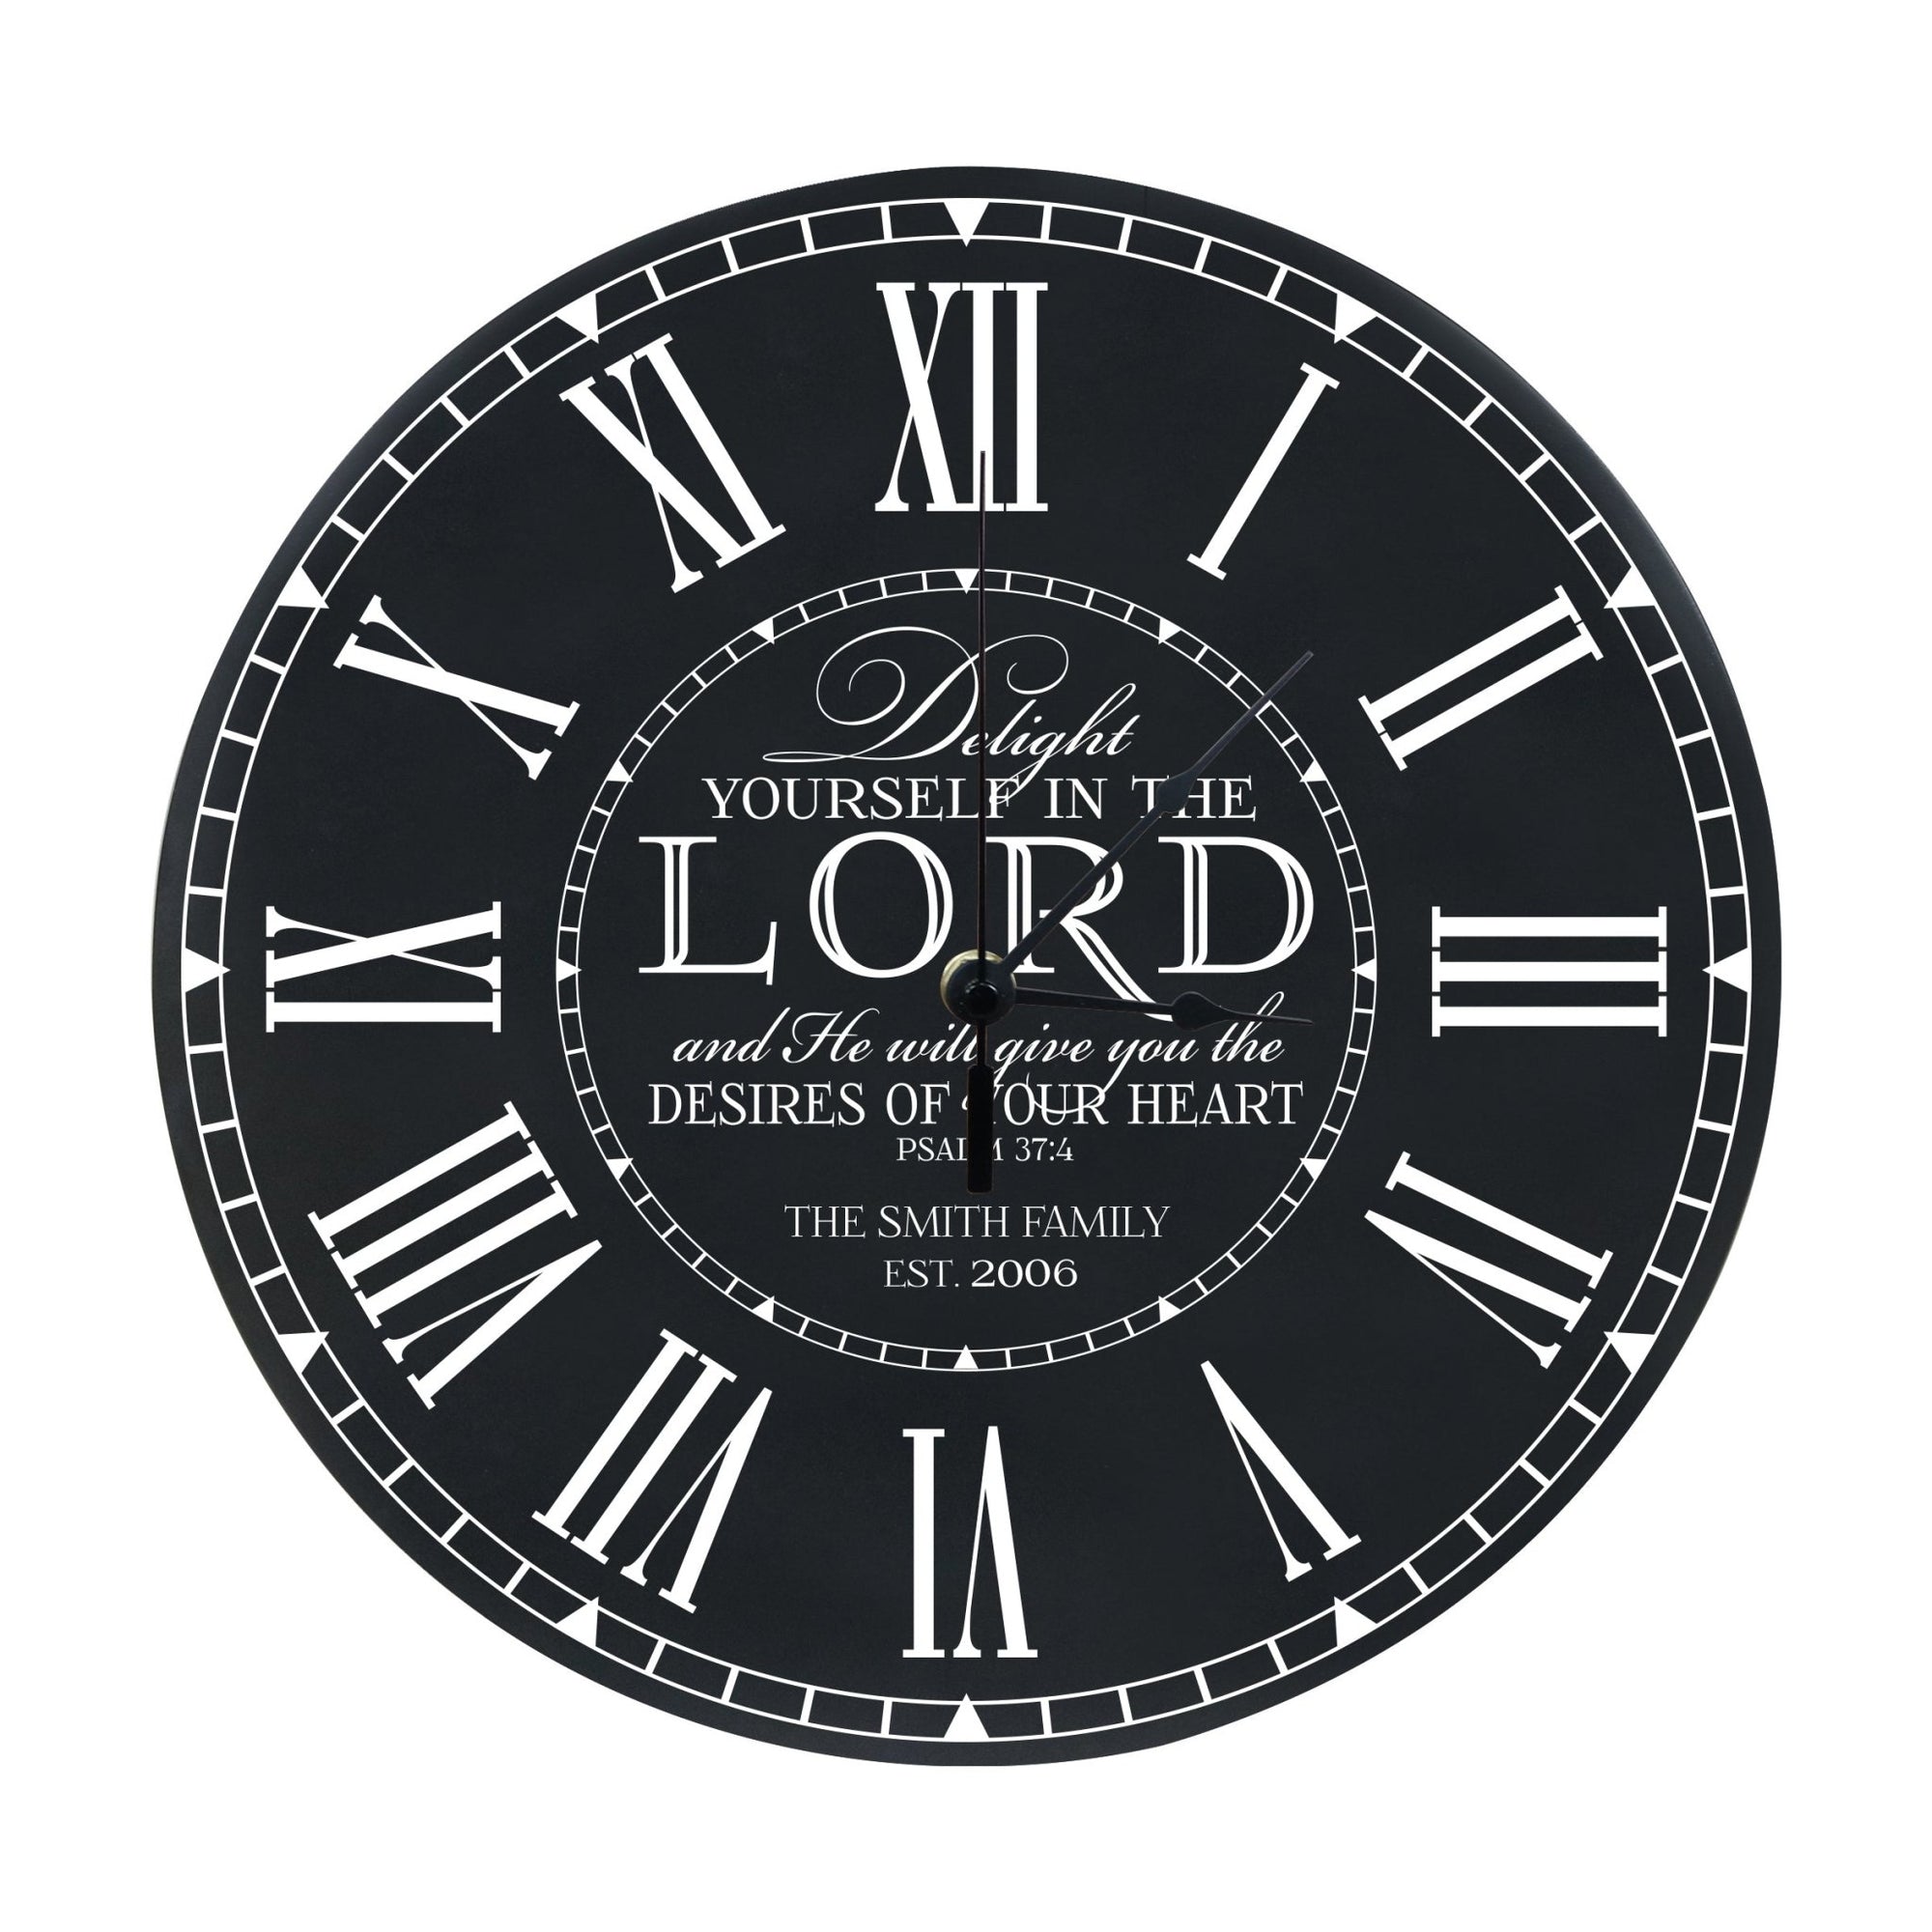 Personalized Everyday Home and Family Clocks - Delight Yourself In The Lord - LifeSong Milestones